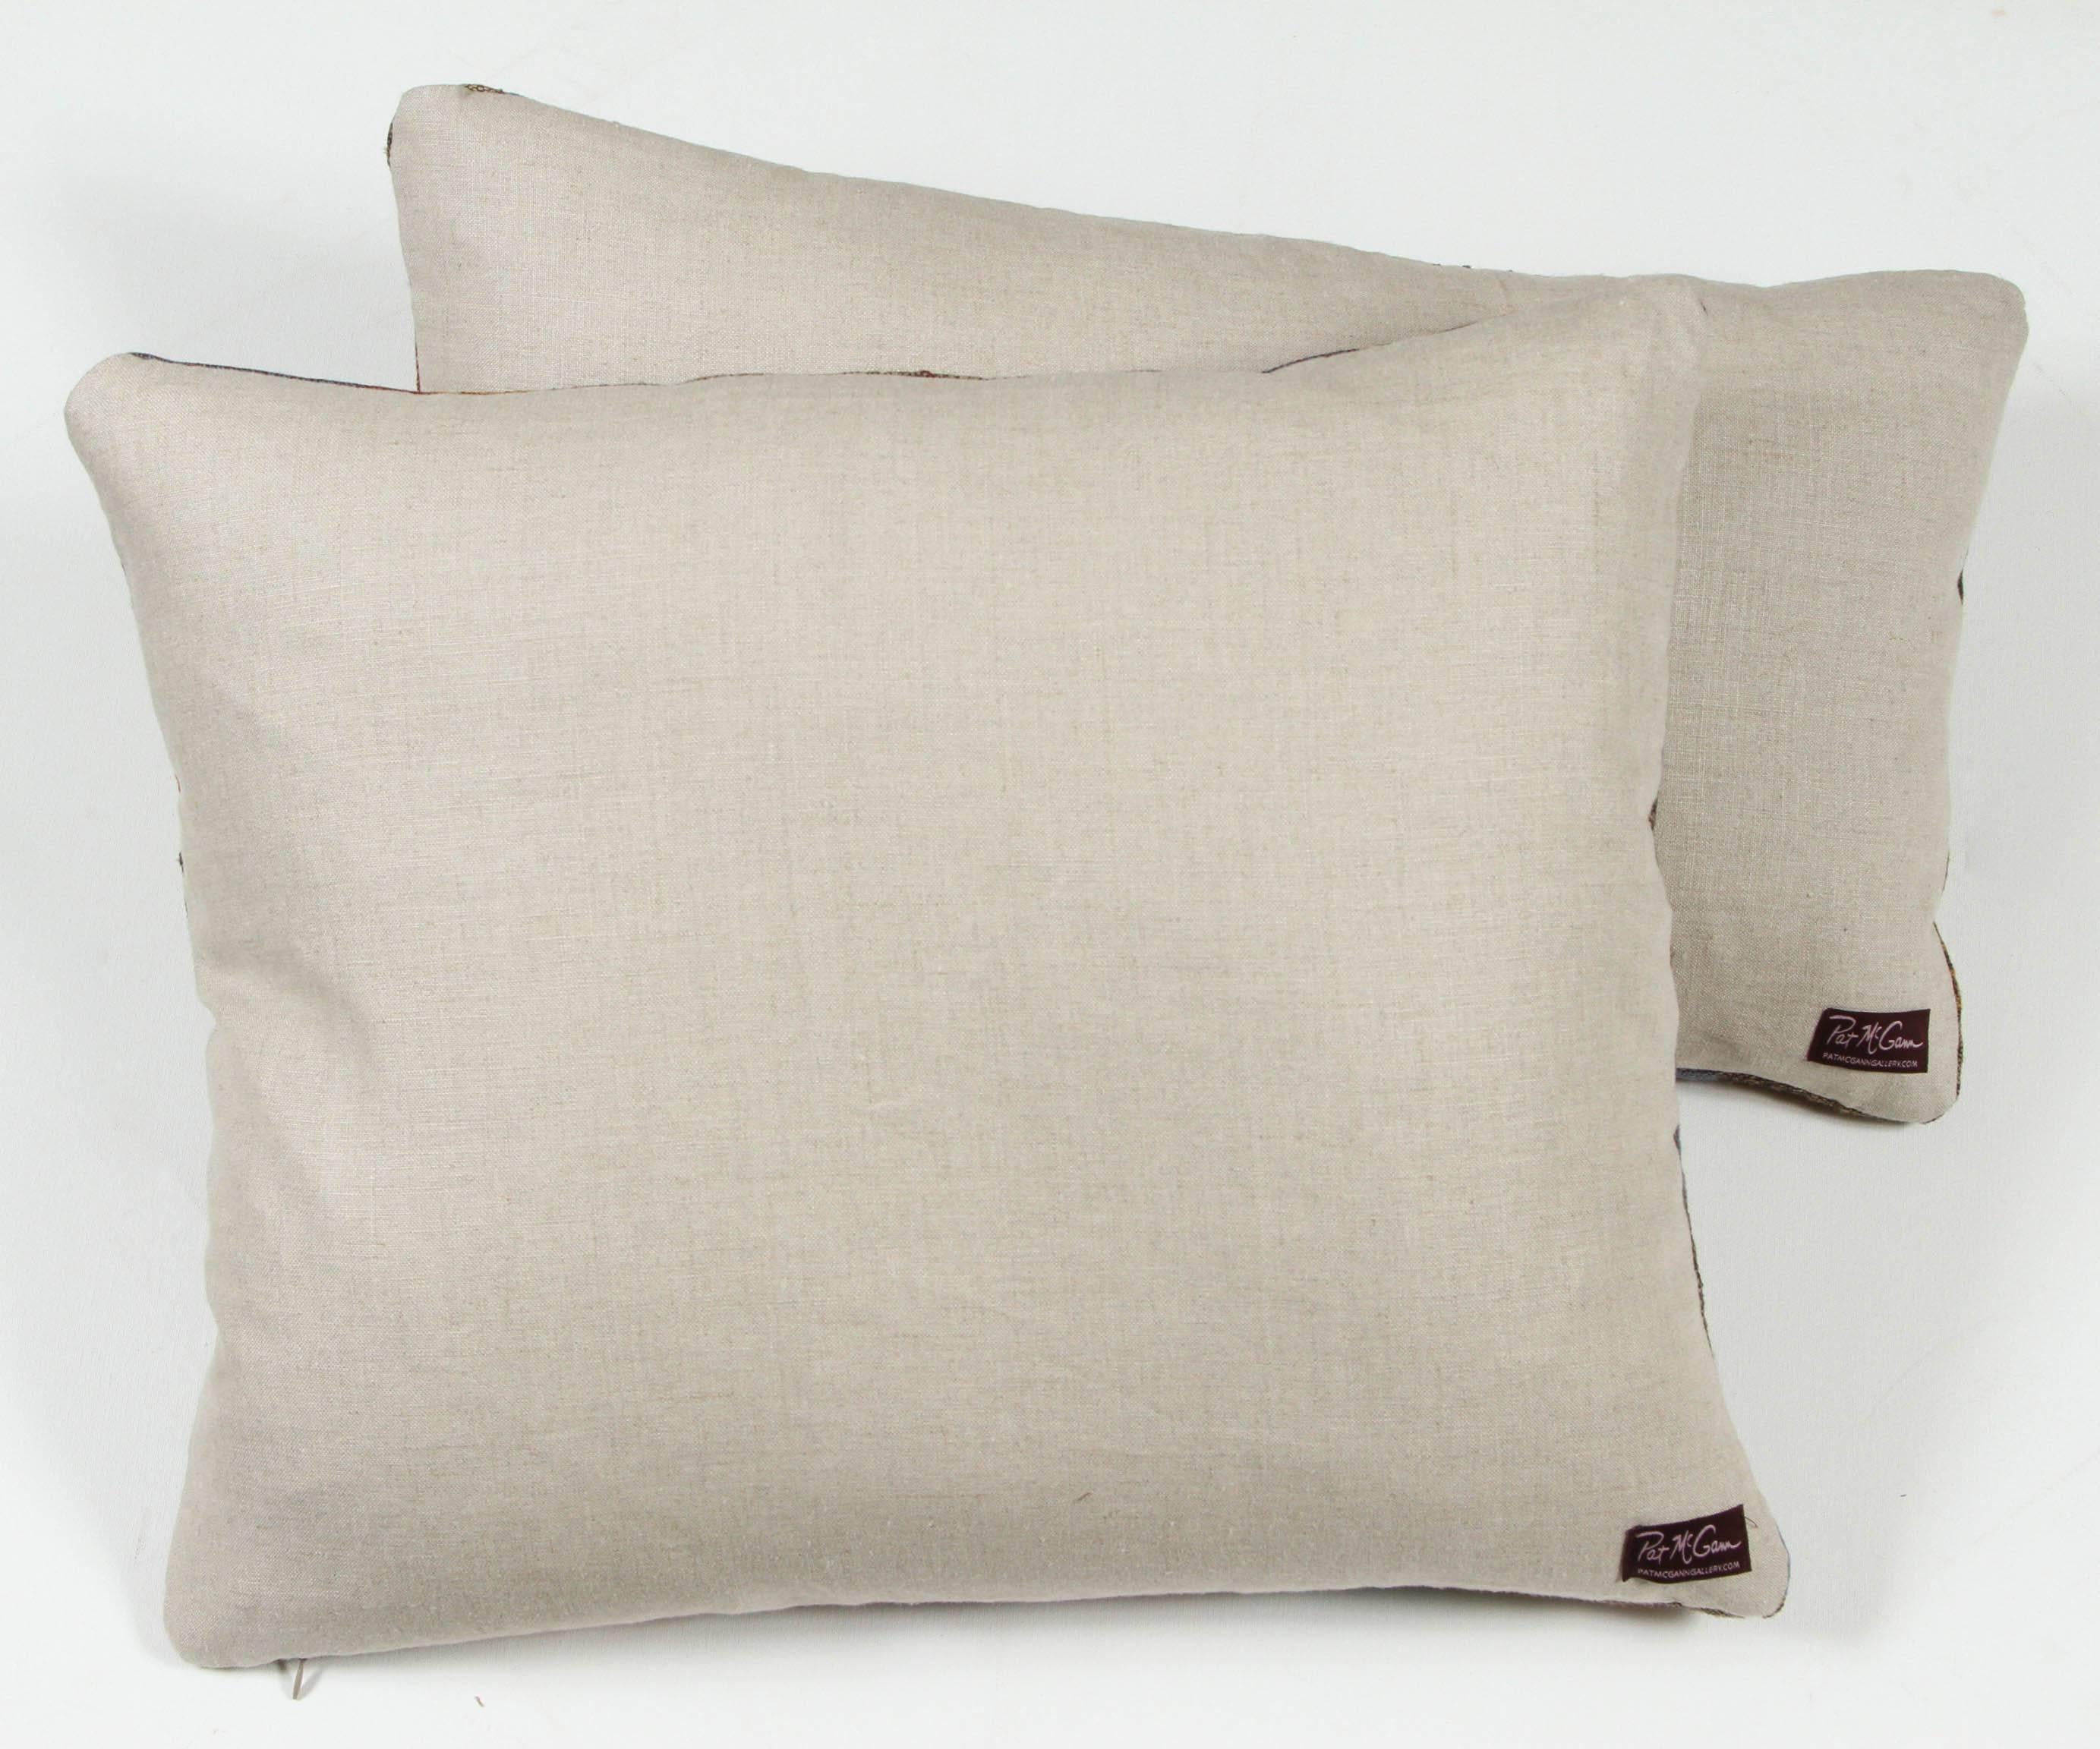 Contemporary Indian Handwoven Pillows For Sale